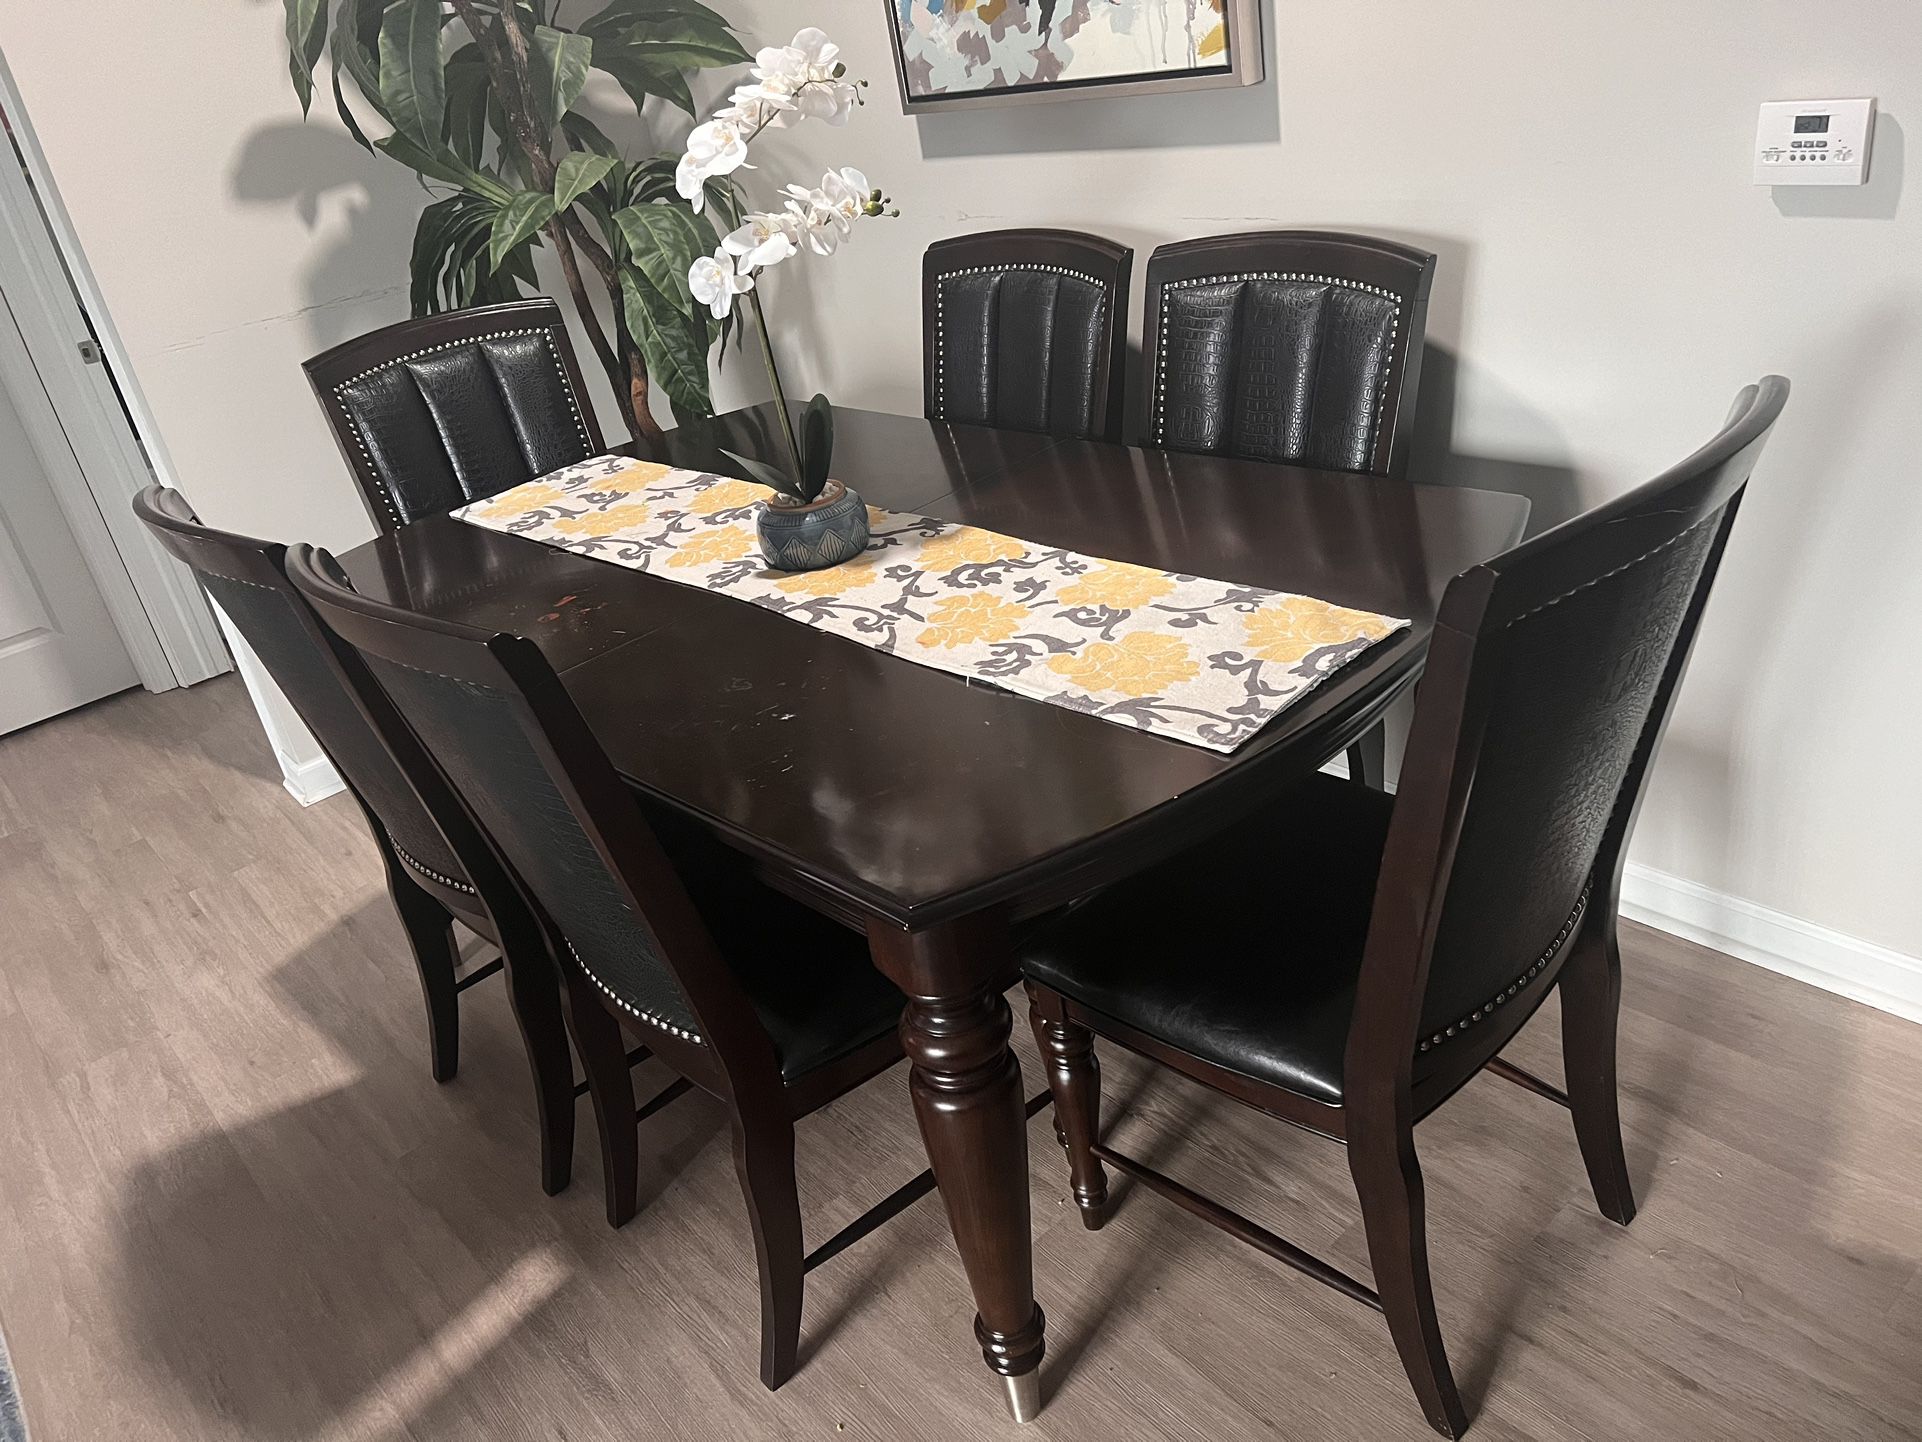 Dinning Table Set - 4 Chairs And It Can Be Extended 